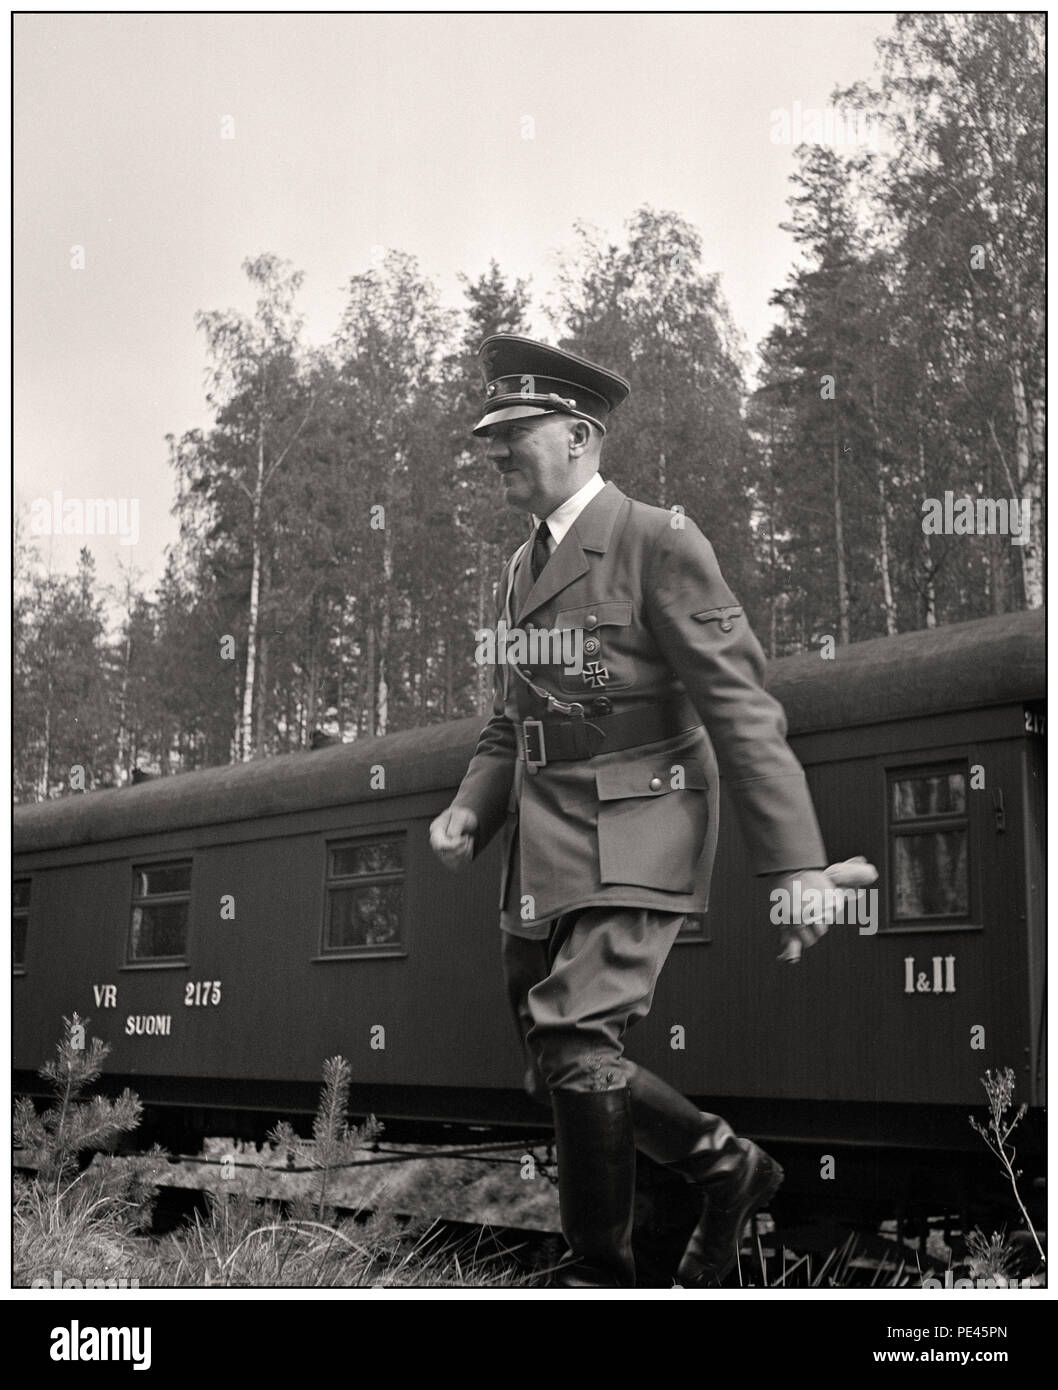 MANNERHEIM / HITLER Adolf Hitler decided to visit Finland on 4 June 1942, ostensibly to congratulate Mannerheim on his 75th birthday. But Mannerheim did not want to meet him in his headquarters in Mikkeli or in Helsinki, as it would have seemed like an official state visit. The meeting took place near Imatra, in south-eastern Finland, and was arranged in secrecy From Immola Airfield, Hitler, accompanied by President Ryti, was driven to the place where Mannerheim was waiting at a railway siding. The meeting was inconclusive... Stock Photo